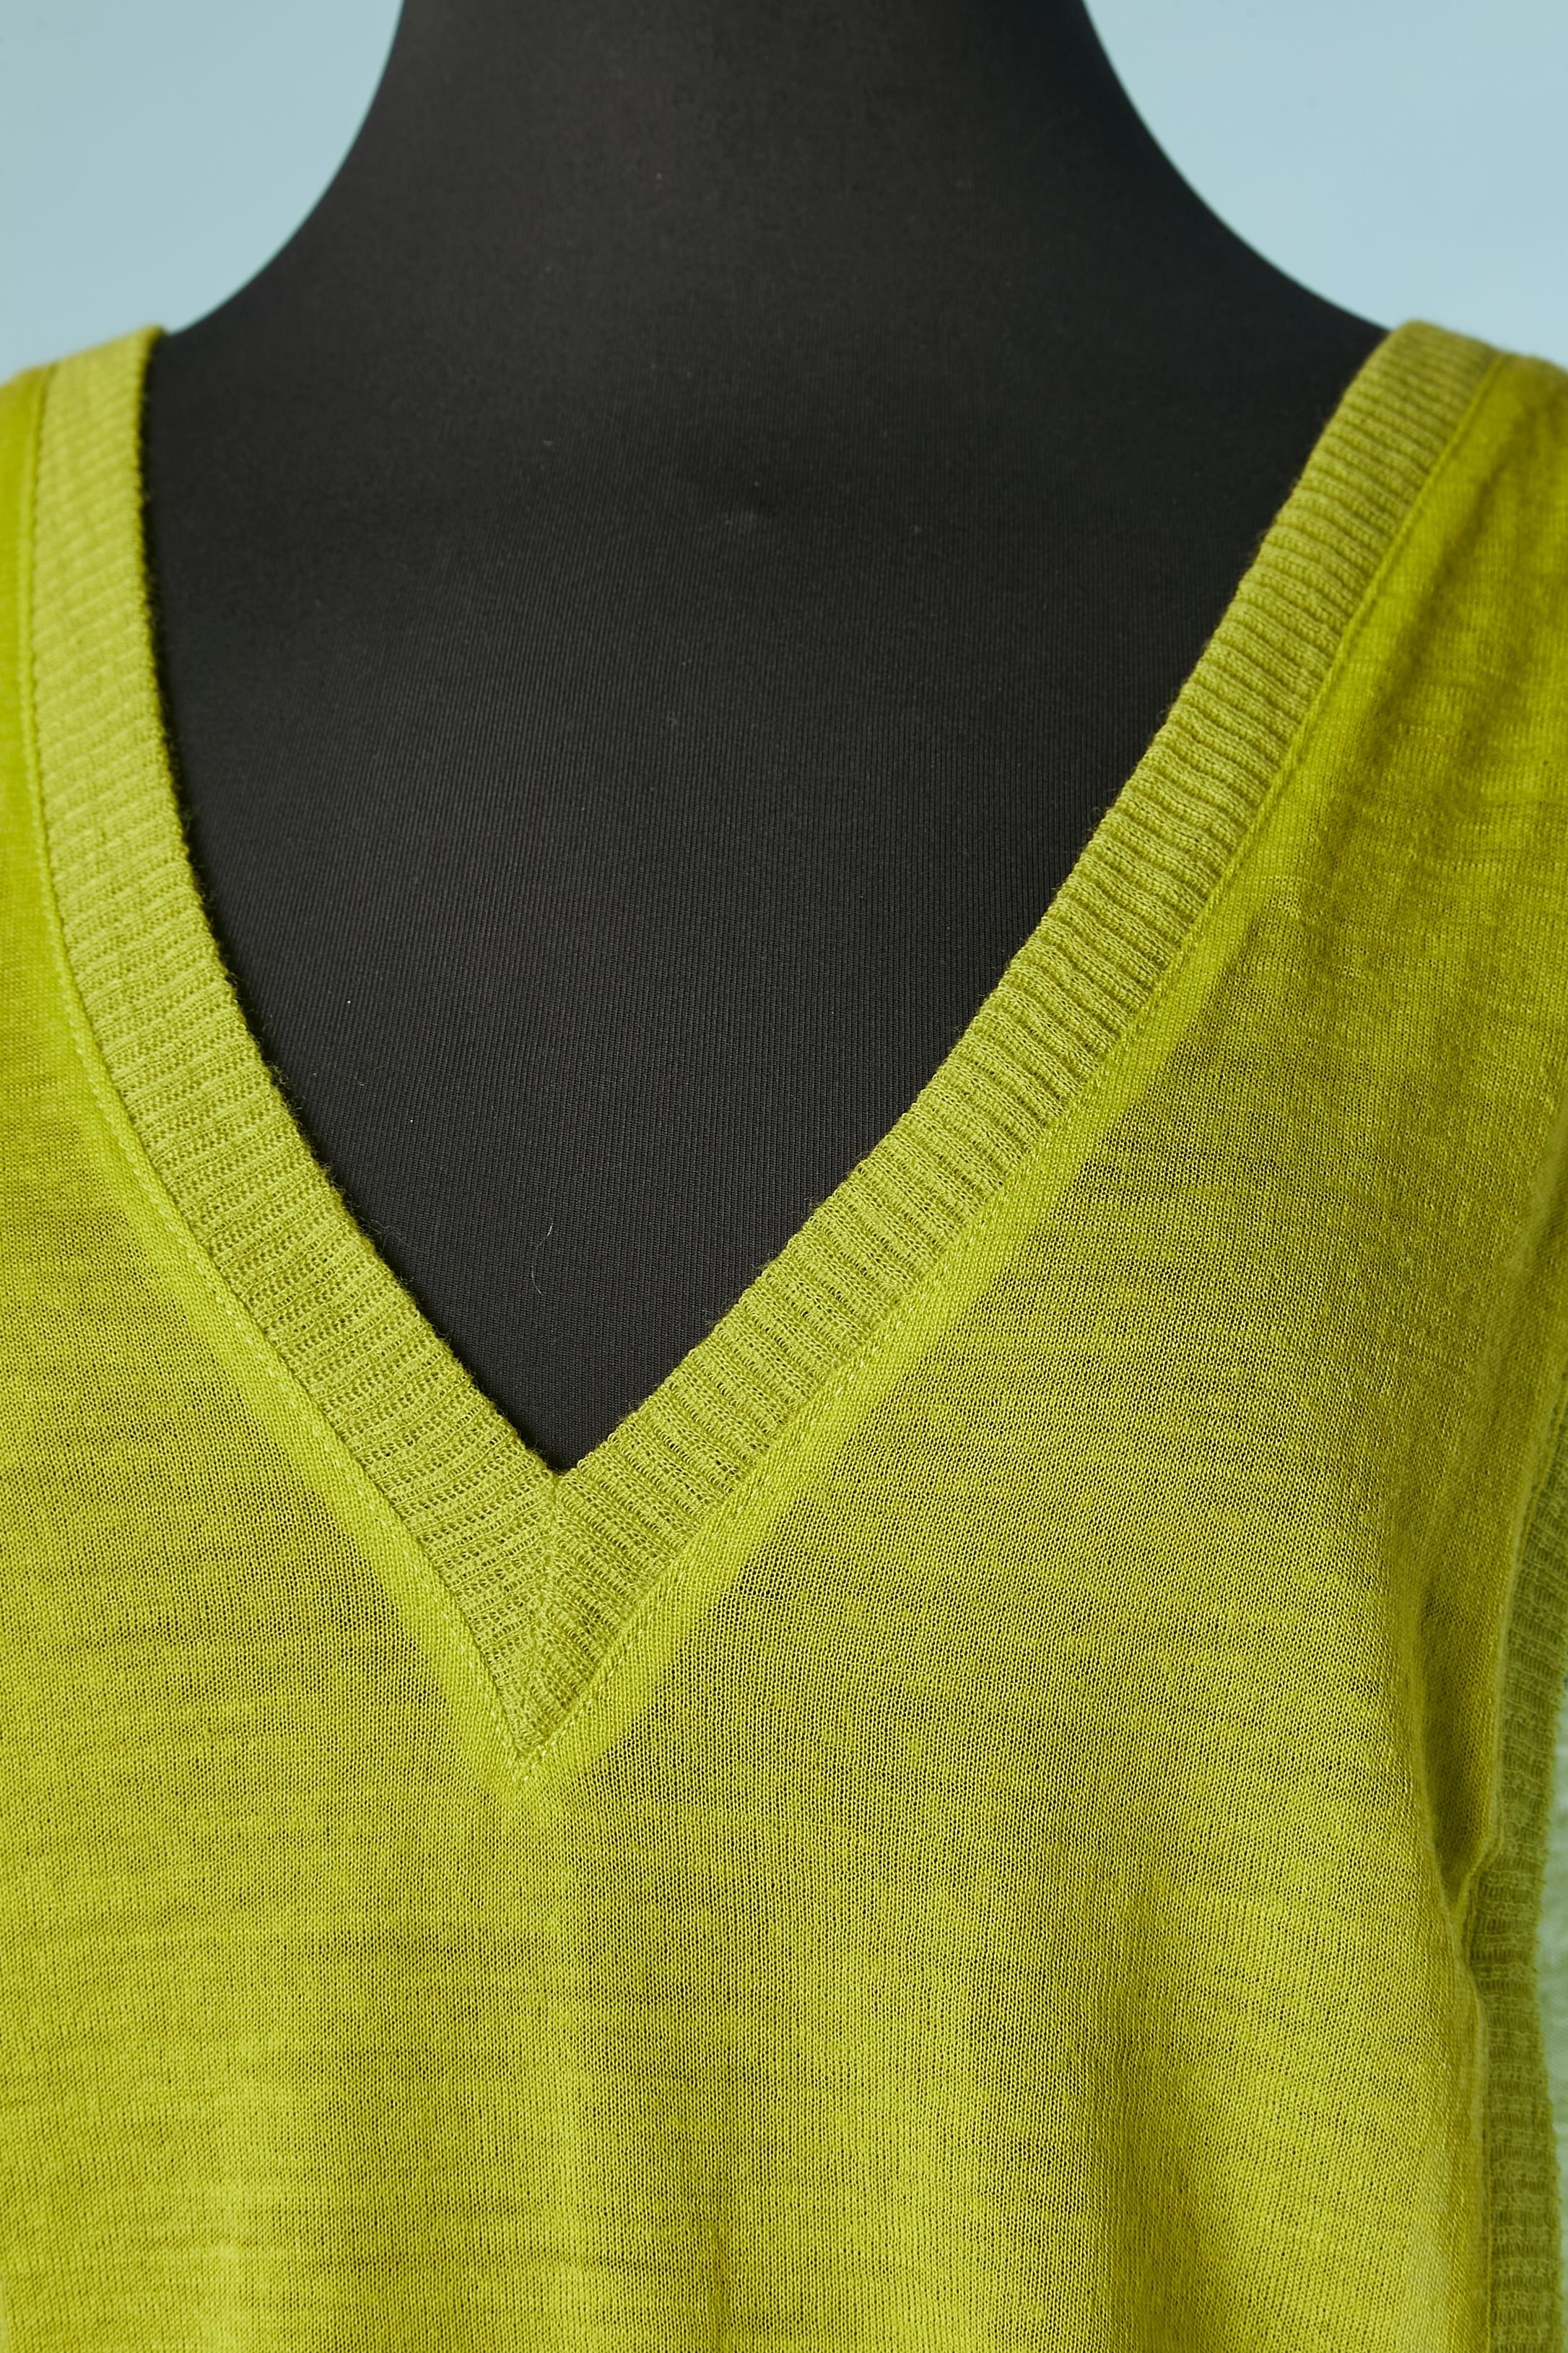 Pistachio green sleeveless sweater. Fabric composition: 50% wool, 50% acrylic. 
SIZE S on tag  but fit M 